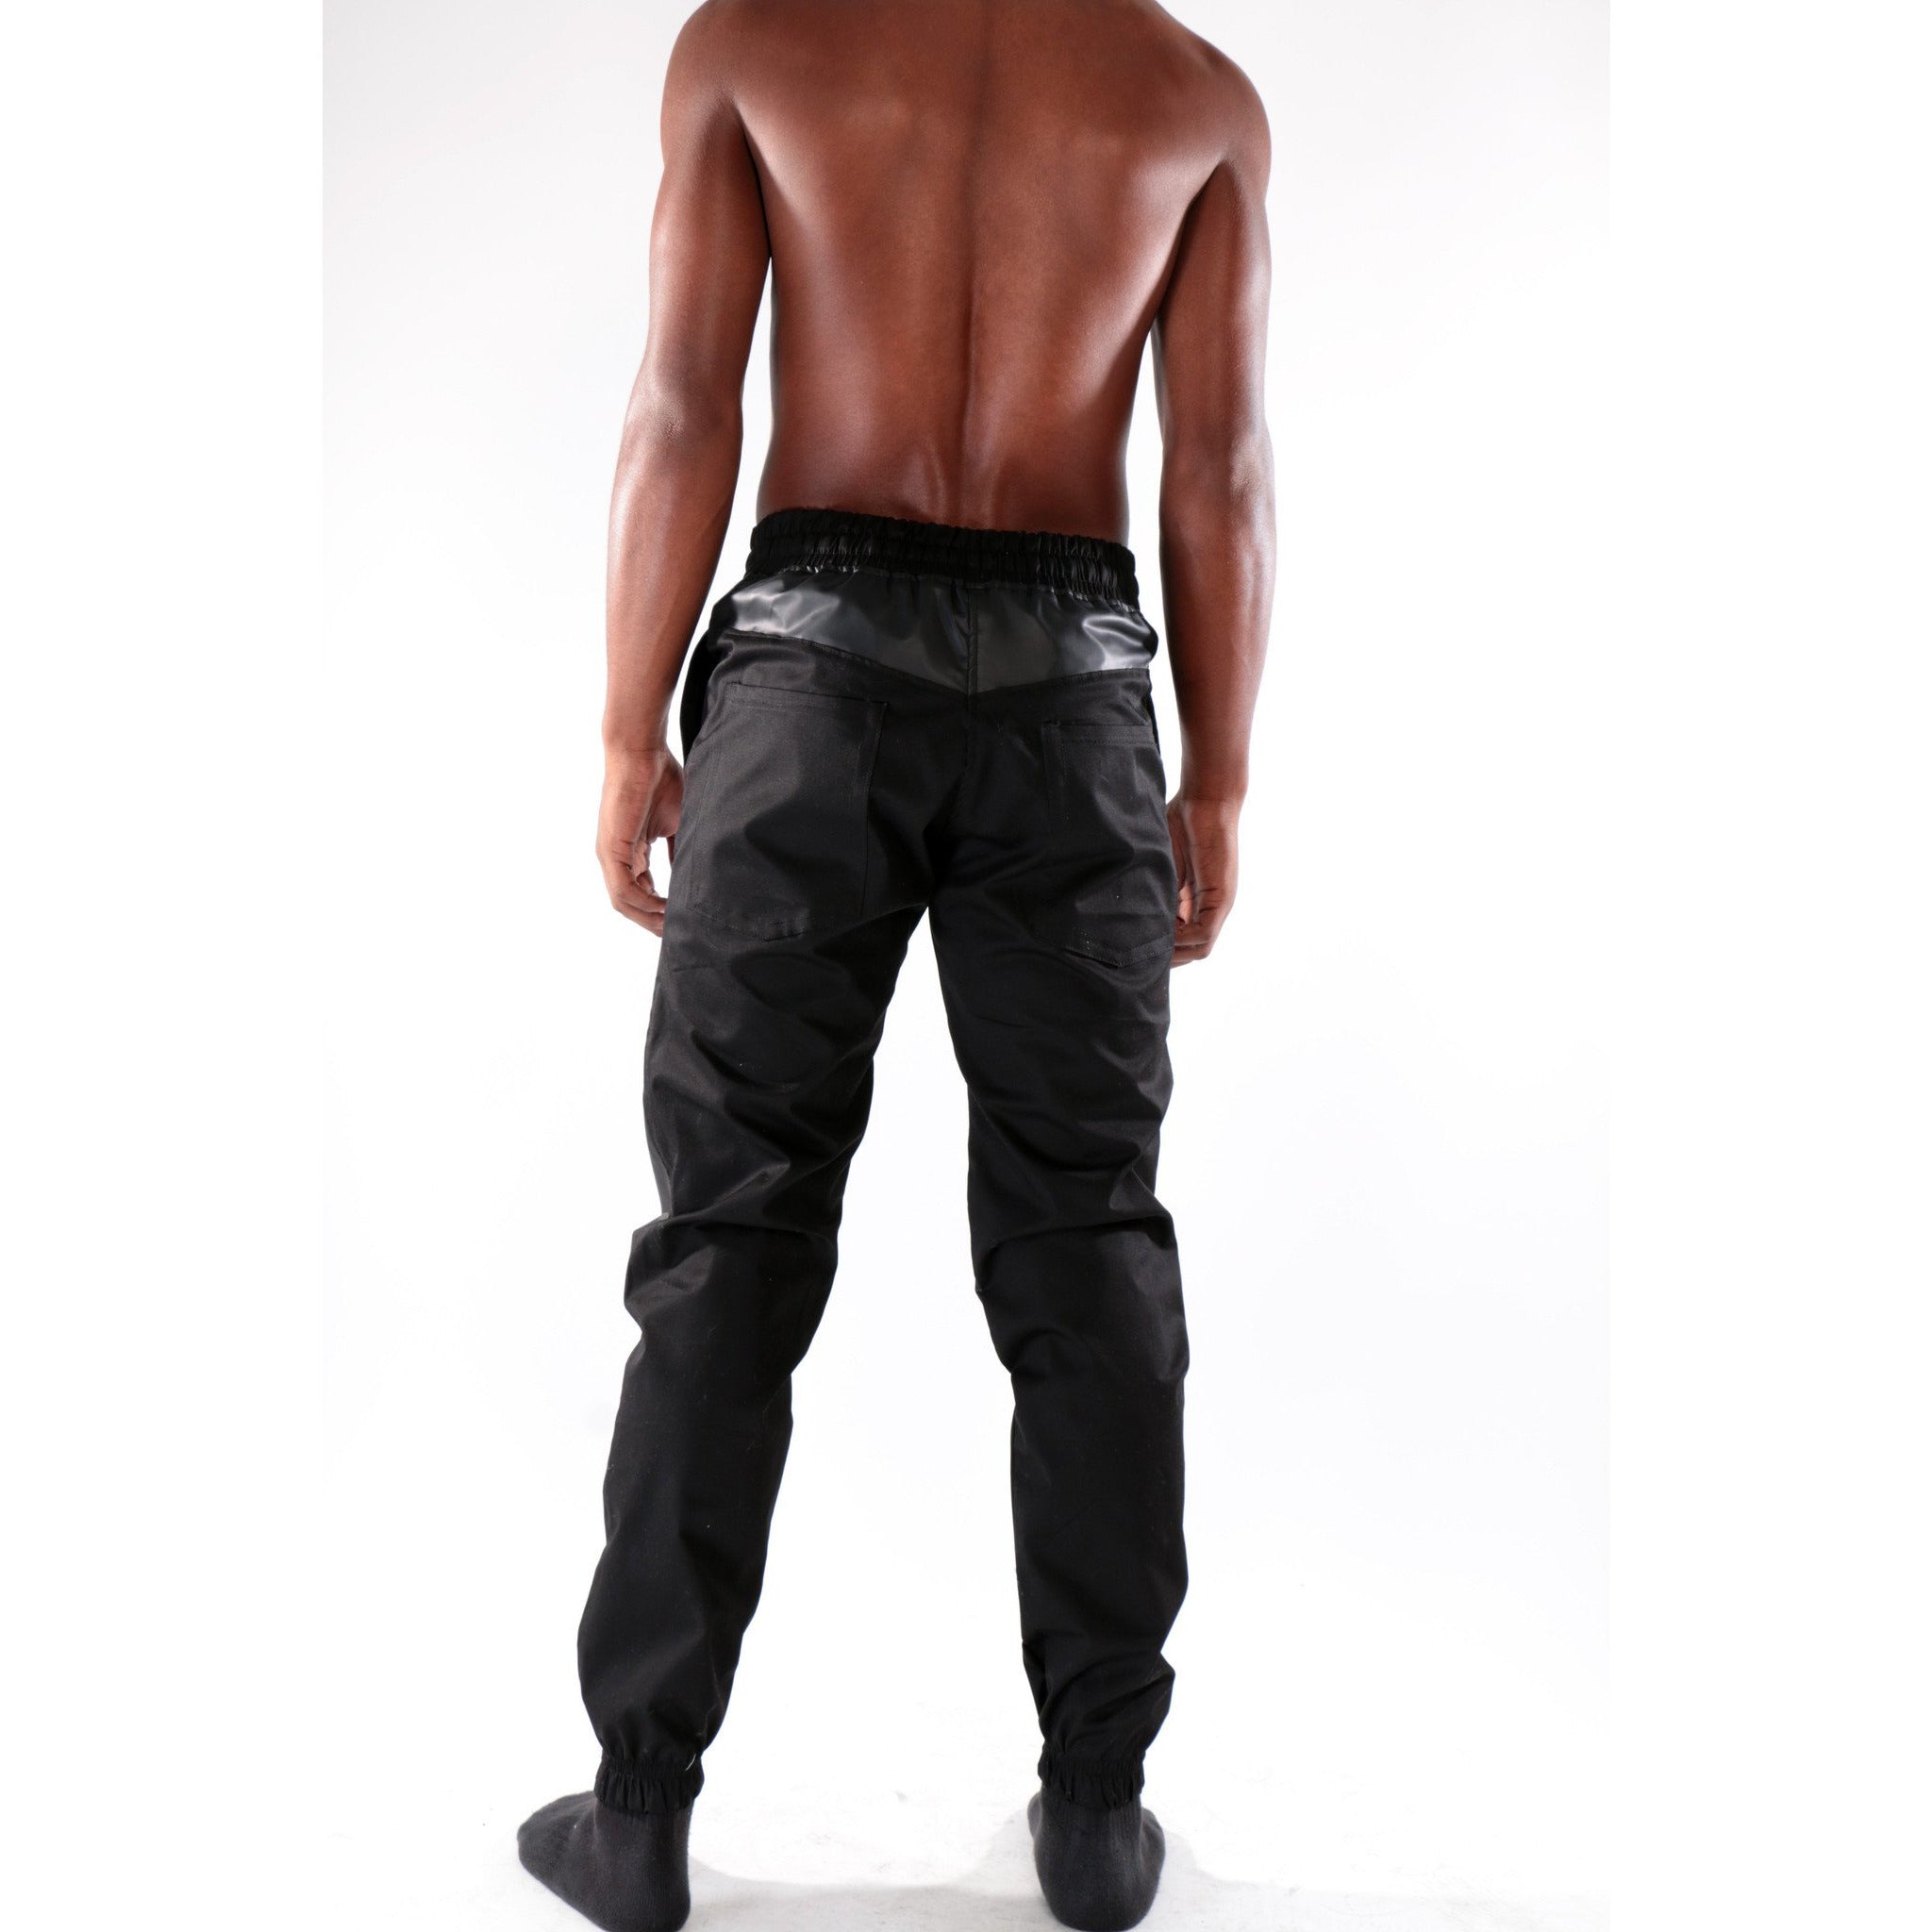 Black high waist fashion trouser with mixed leather